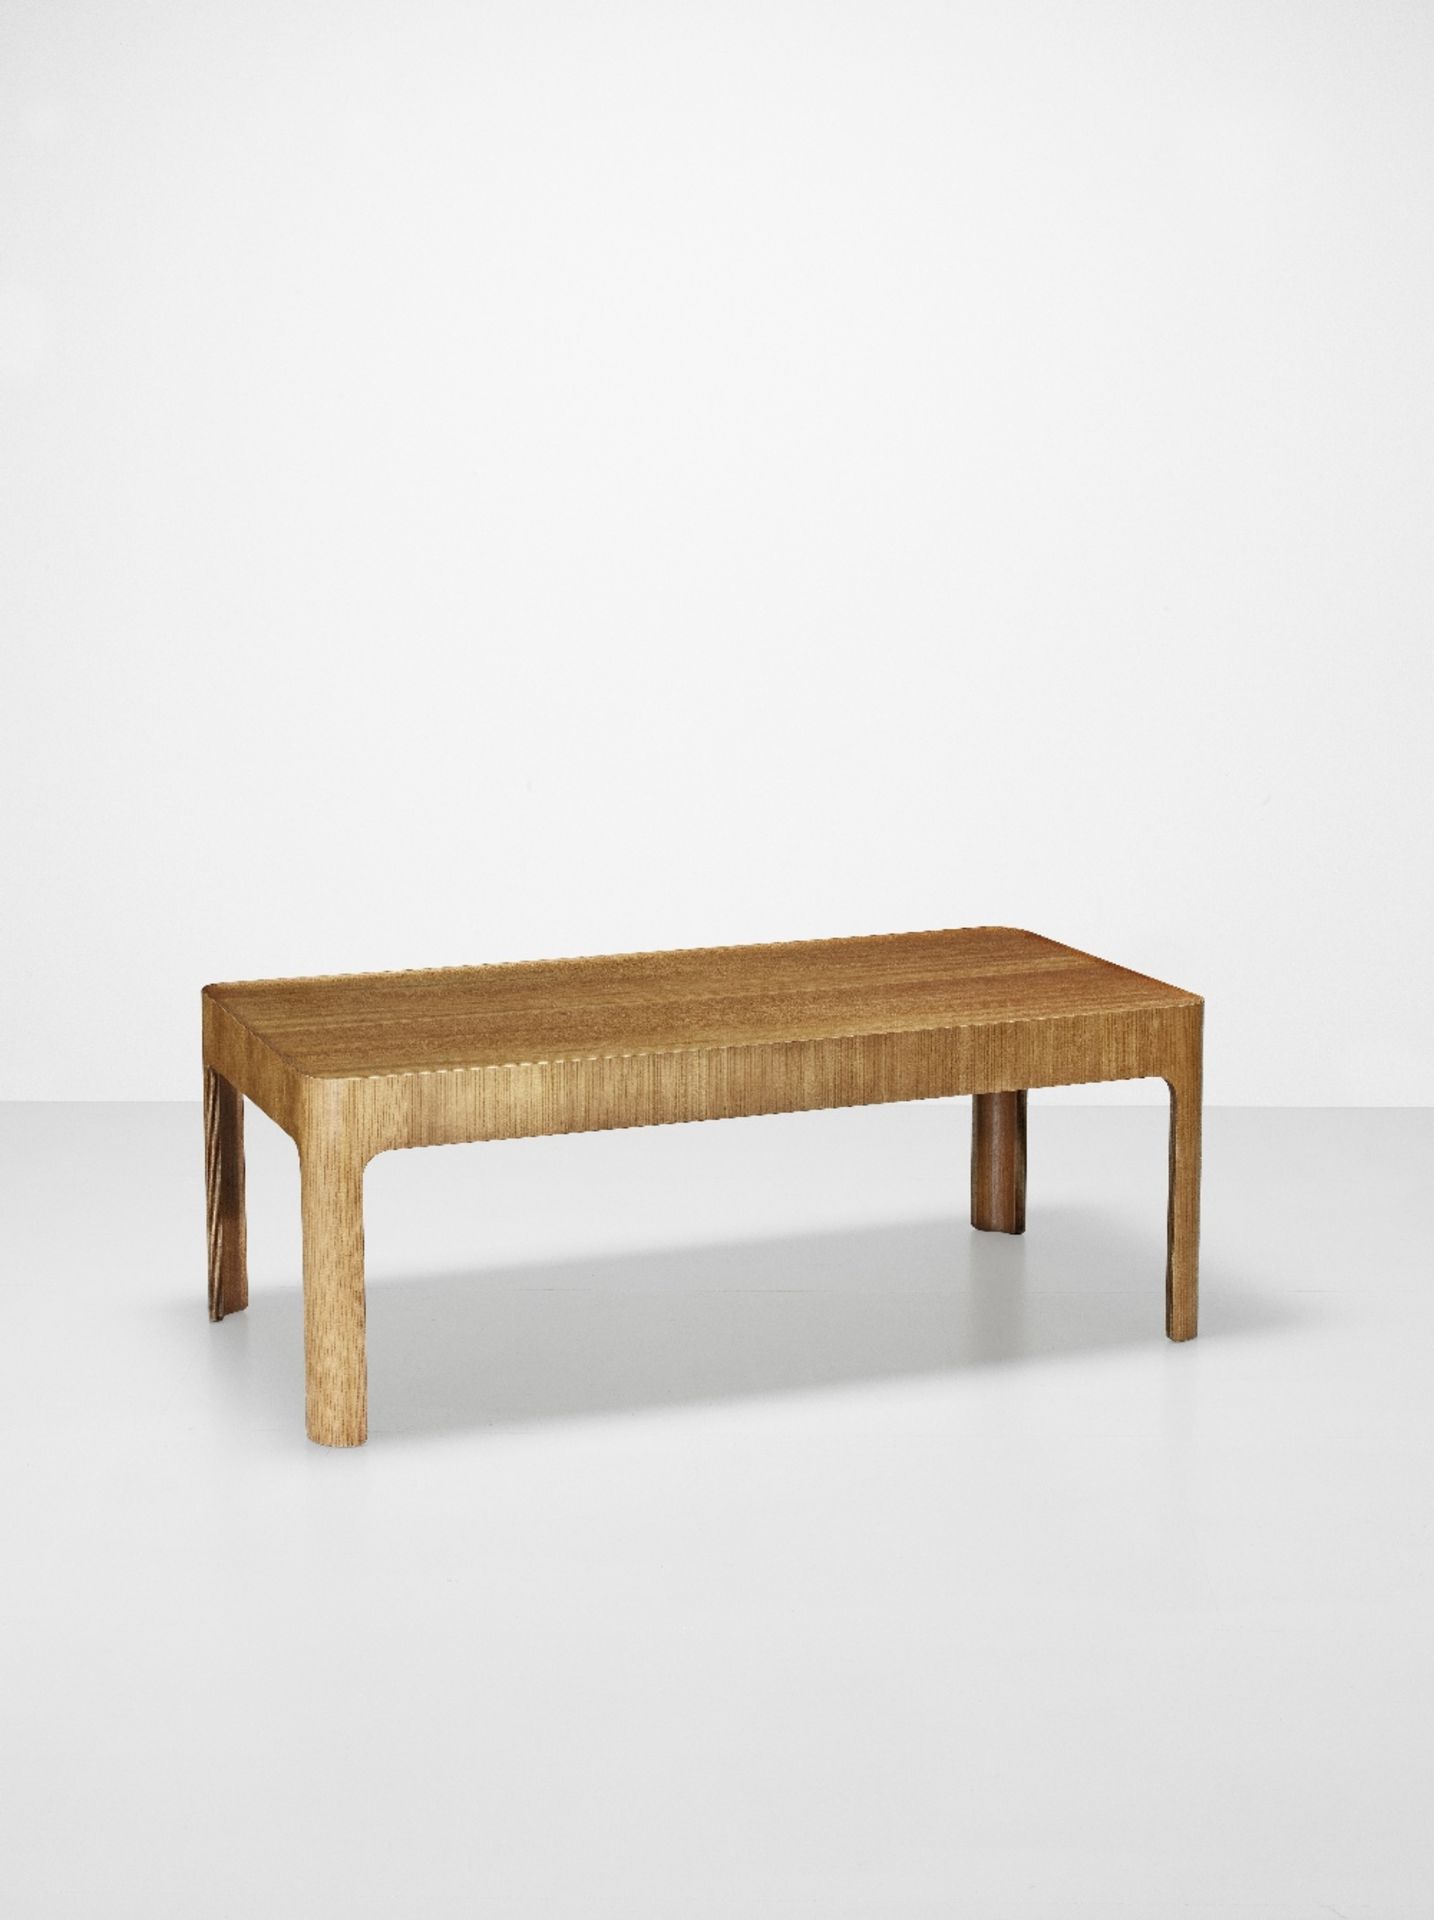 Isamu Kenmochi 'Haco' coffee table, model no. SM6002, designed for the National Kyoto Conference...